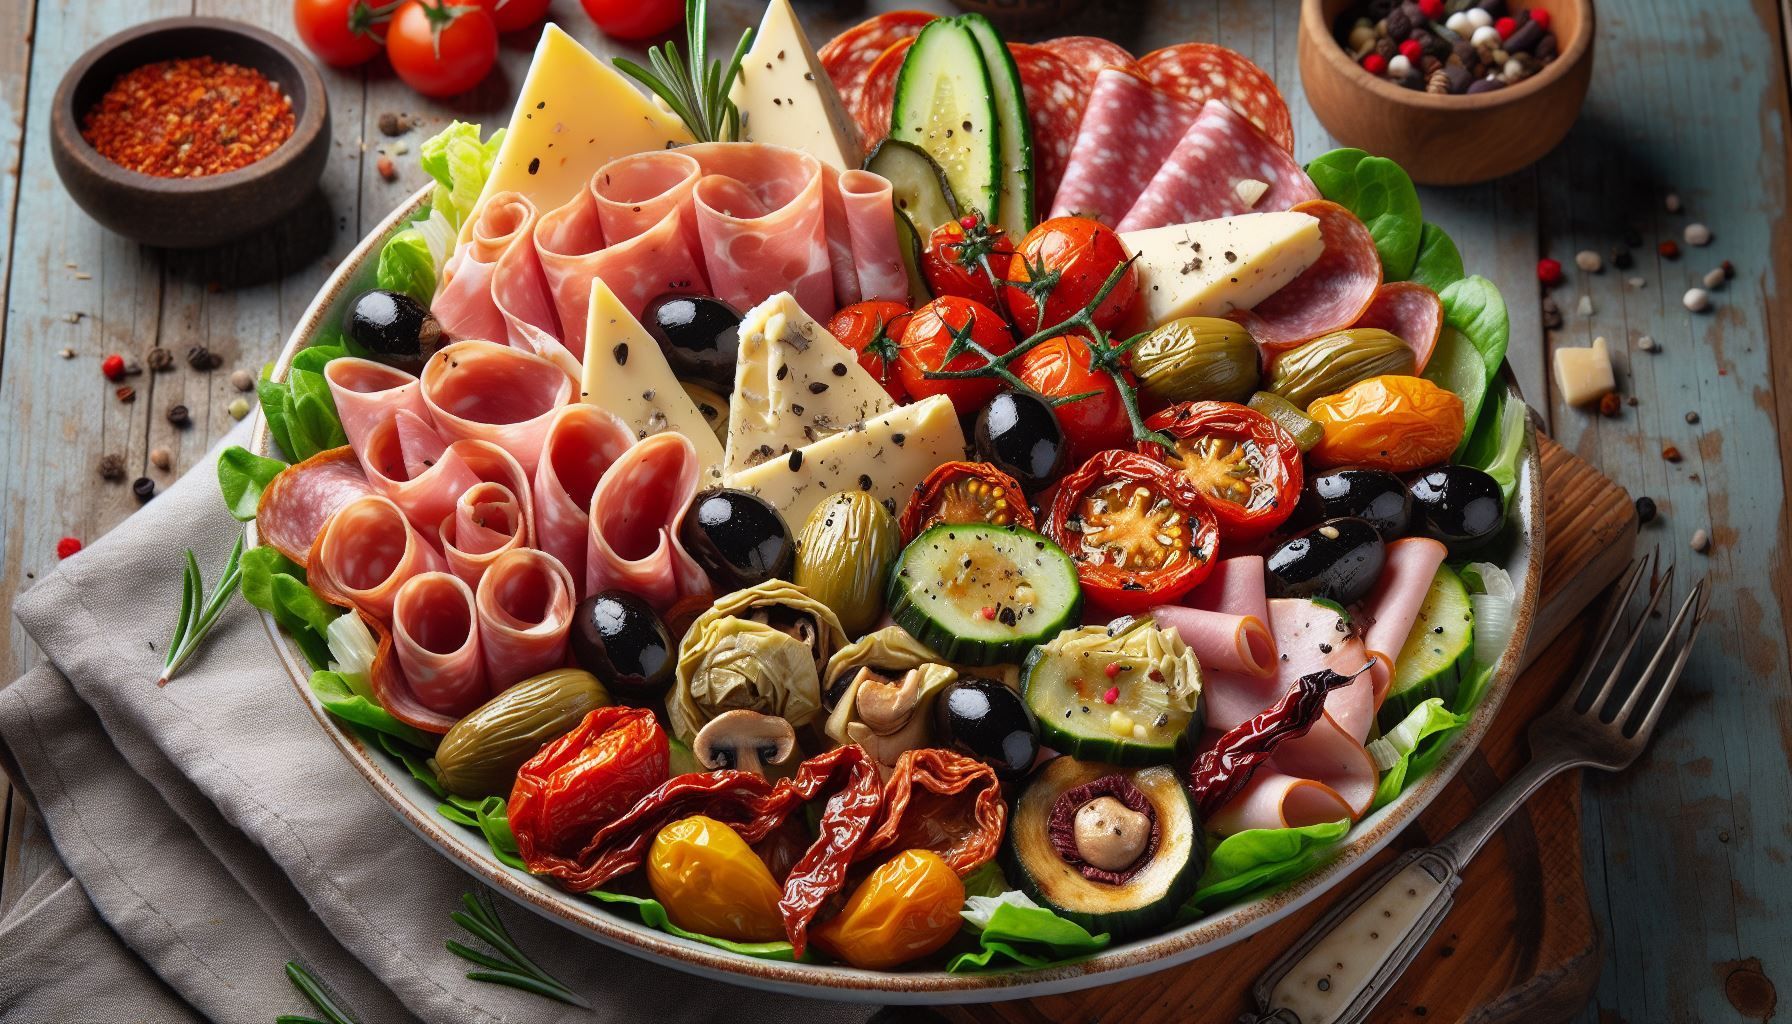 A plate of food with meat , cheese , vegetables and olives on a wooden table.